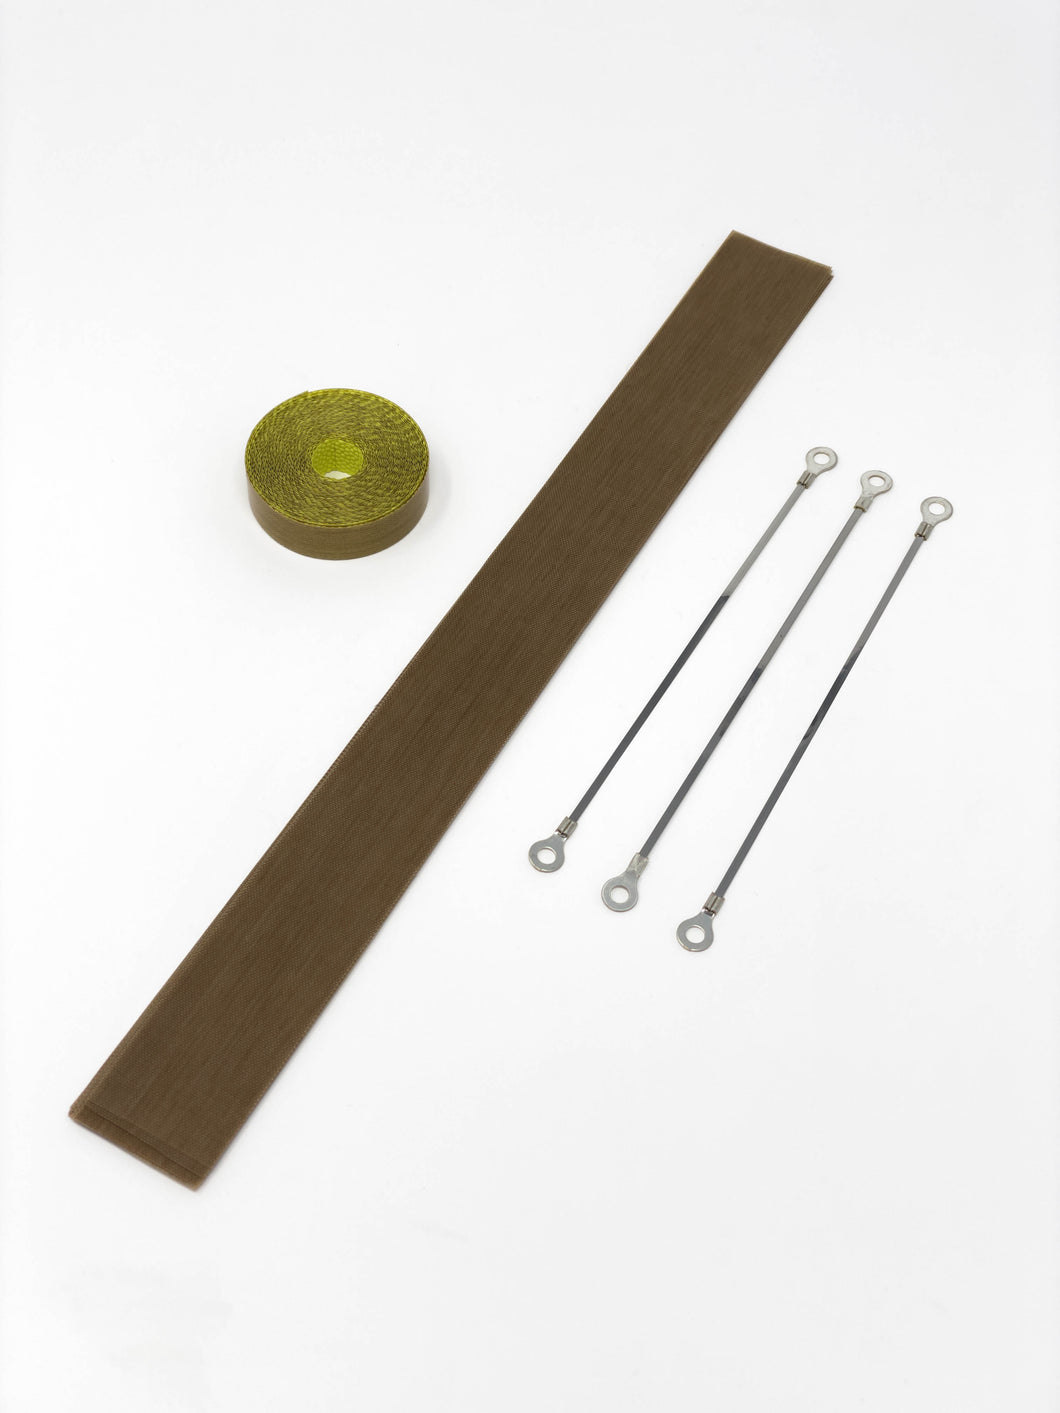 Wire Strips for Tabletop Impulse Sealers